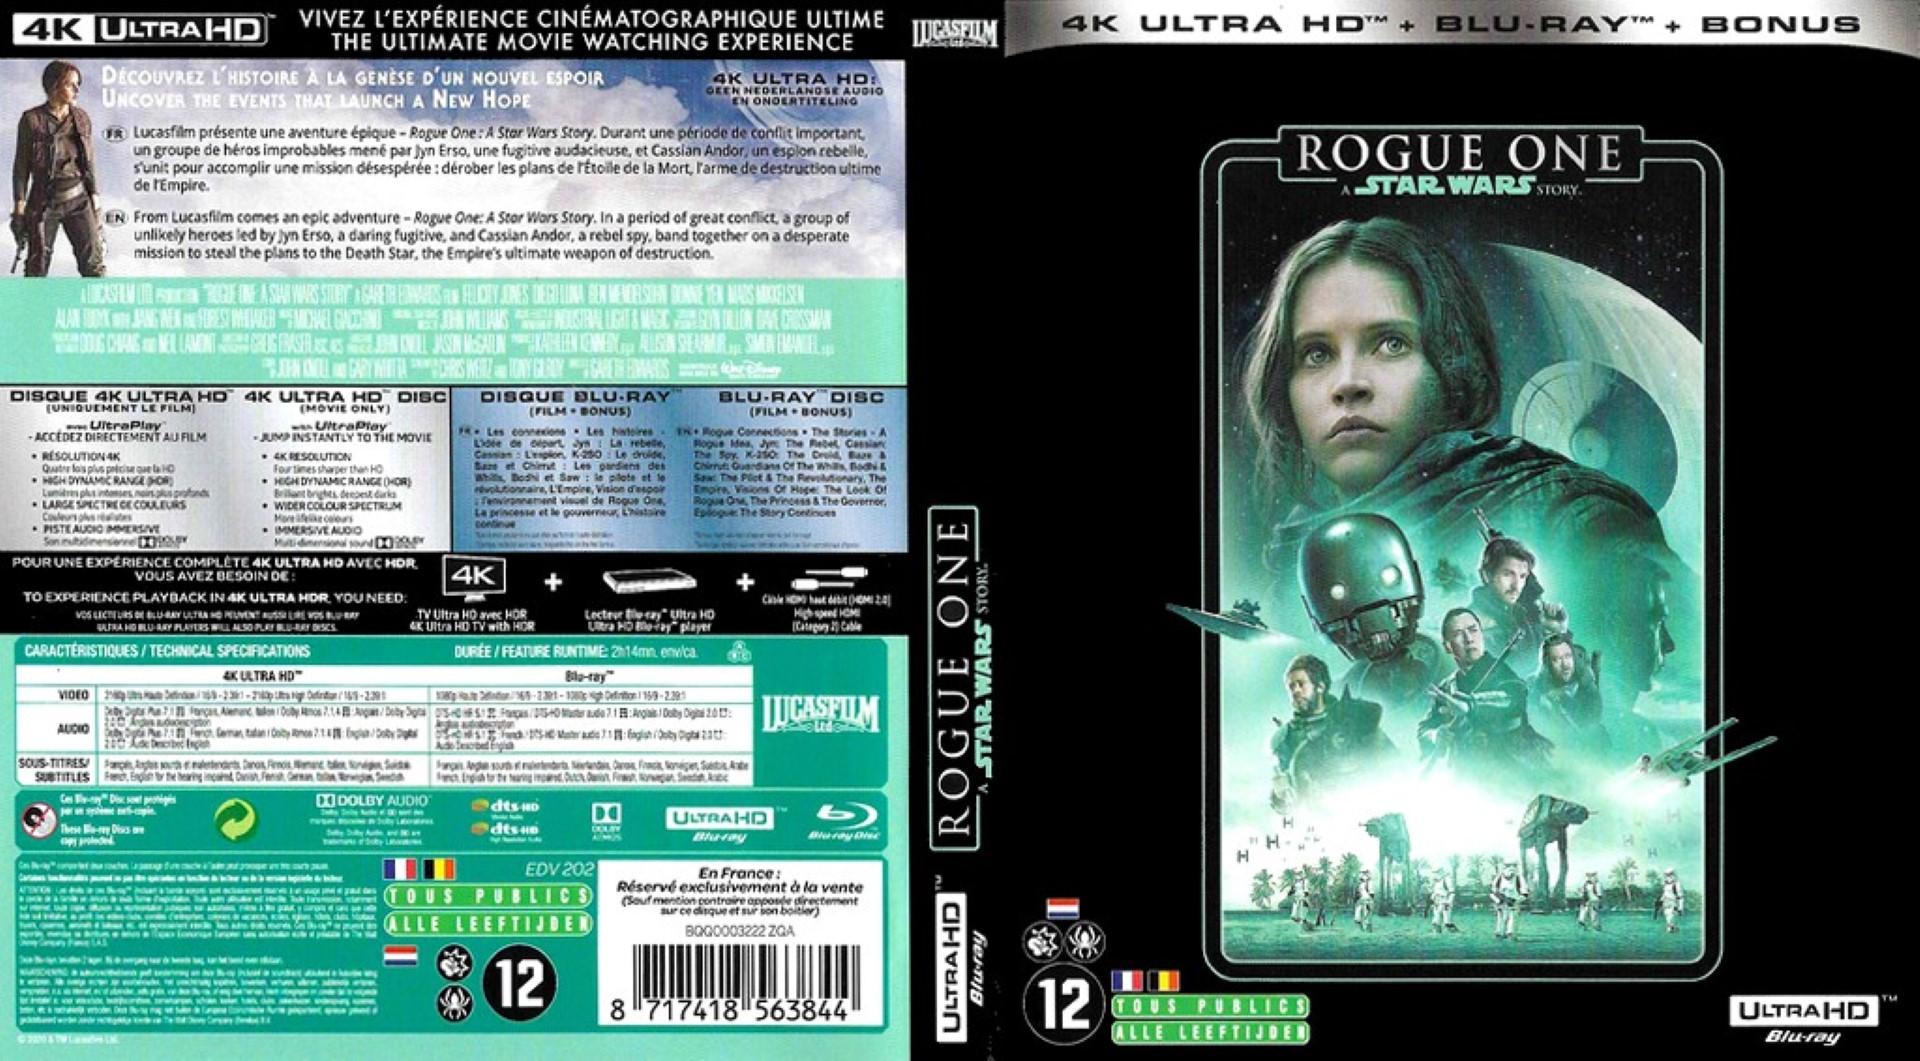 Jaquette DVD Star Wars - Rogue One - 4K (BLU-RAY)